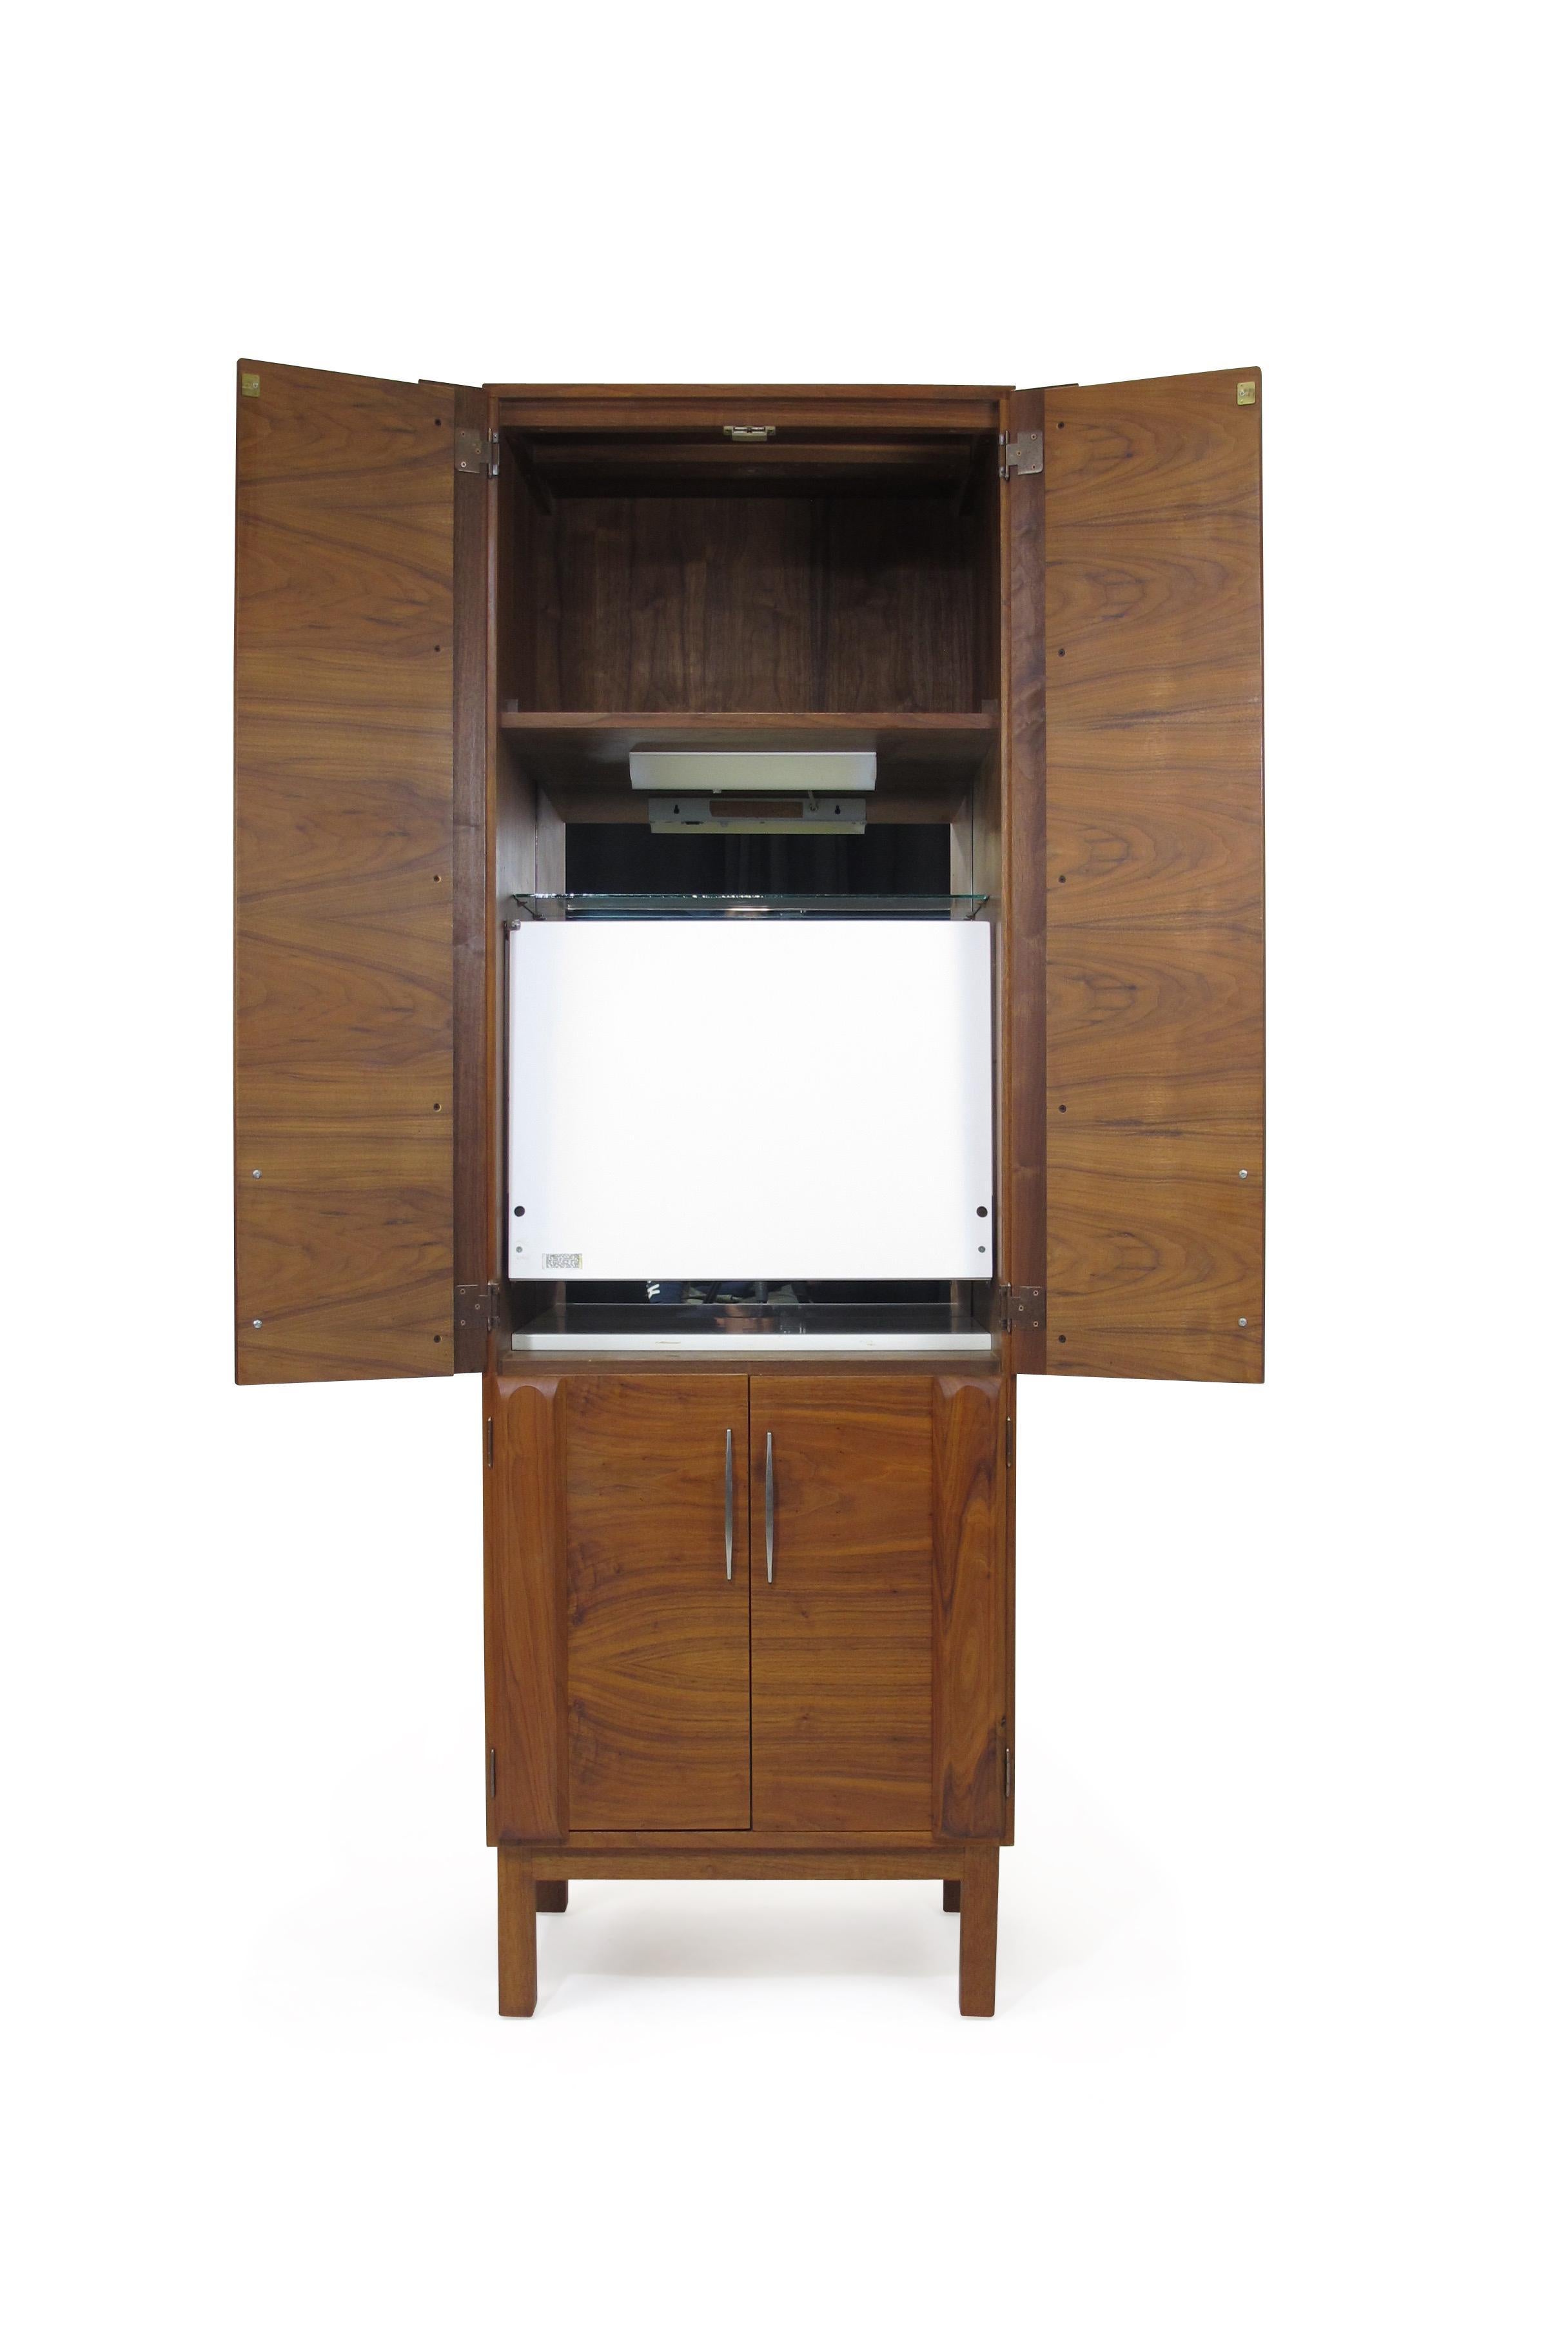 Tall and narrow midcentury walnut bar cabinet designed by California architect Martin Borenstein for MB design, circa 1960, US. Crafted of walnut wood and features four doors with aluminum pulls which enclose: a flip open mirrored bar, two glass